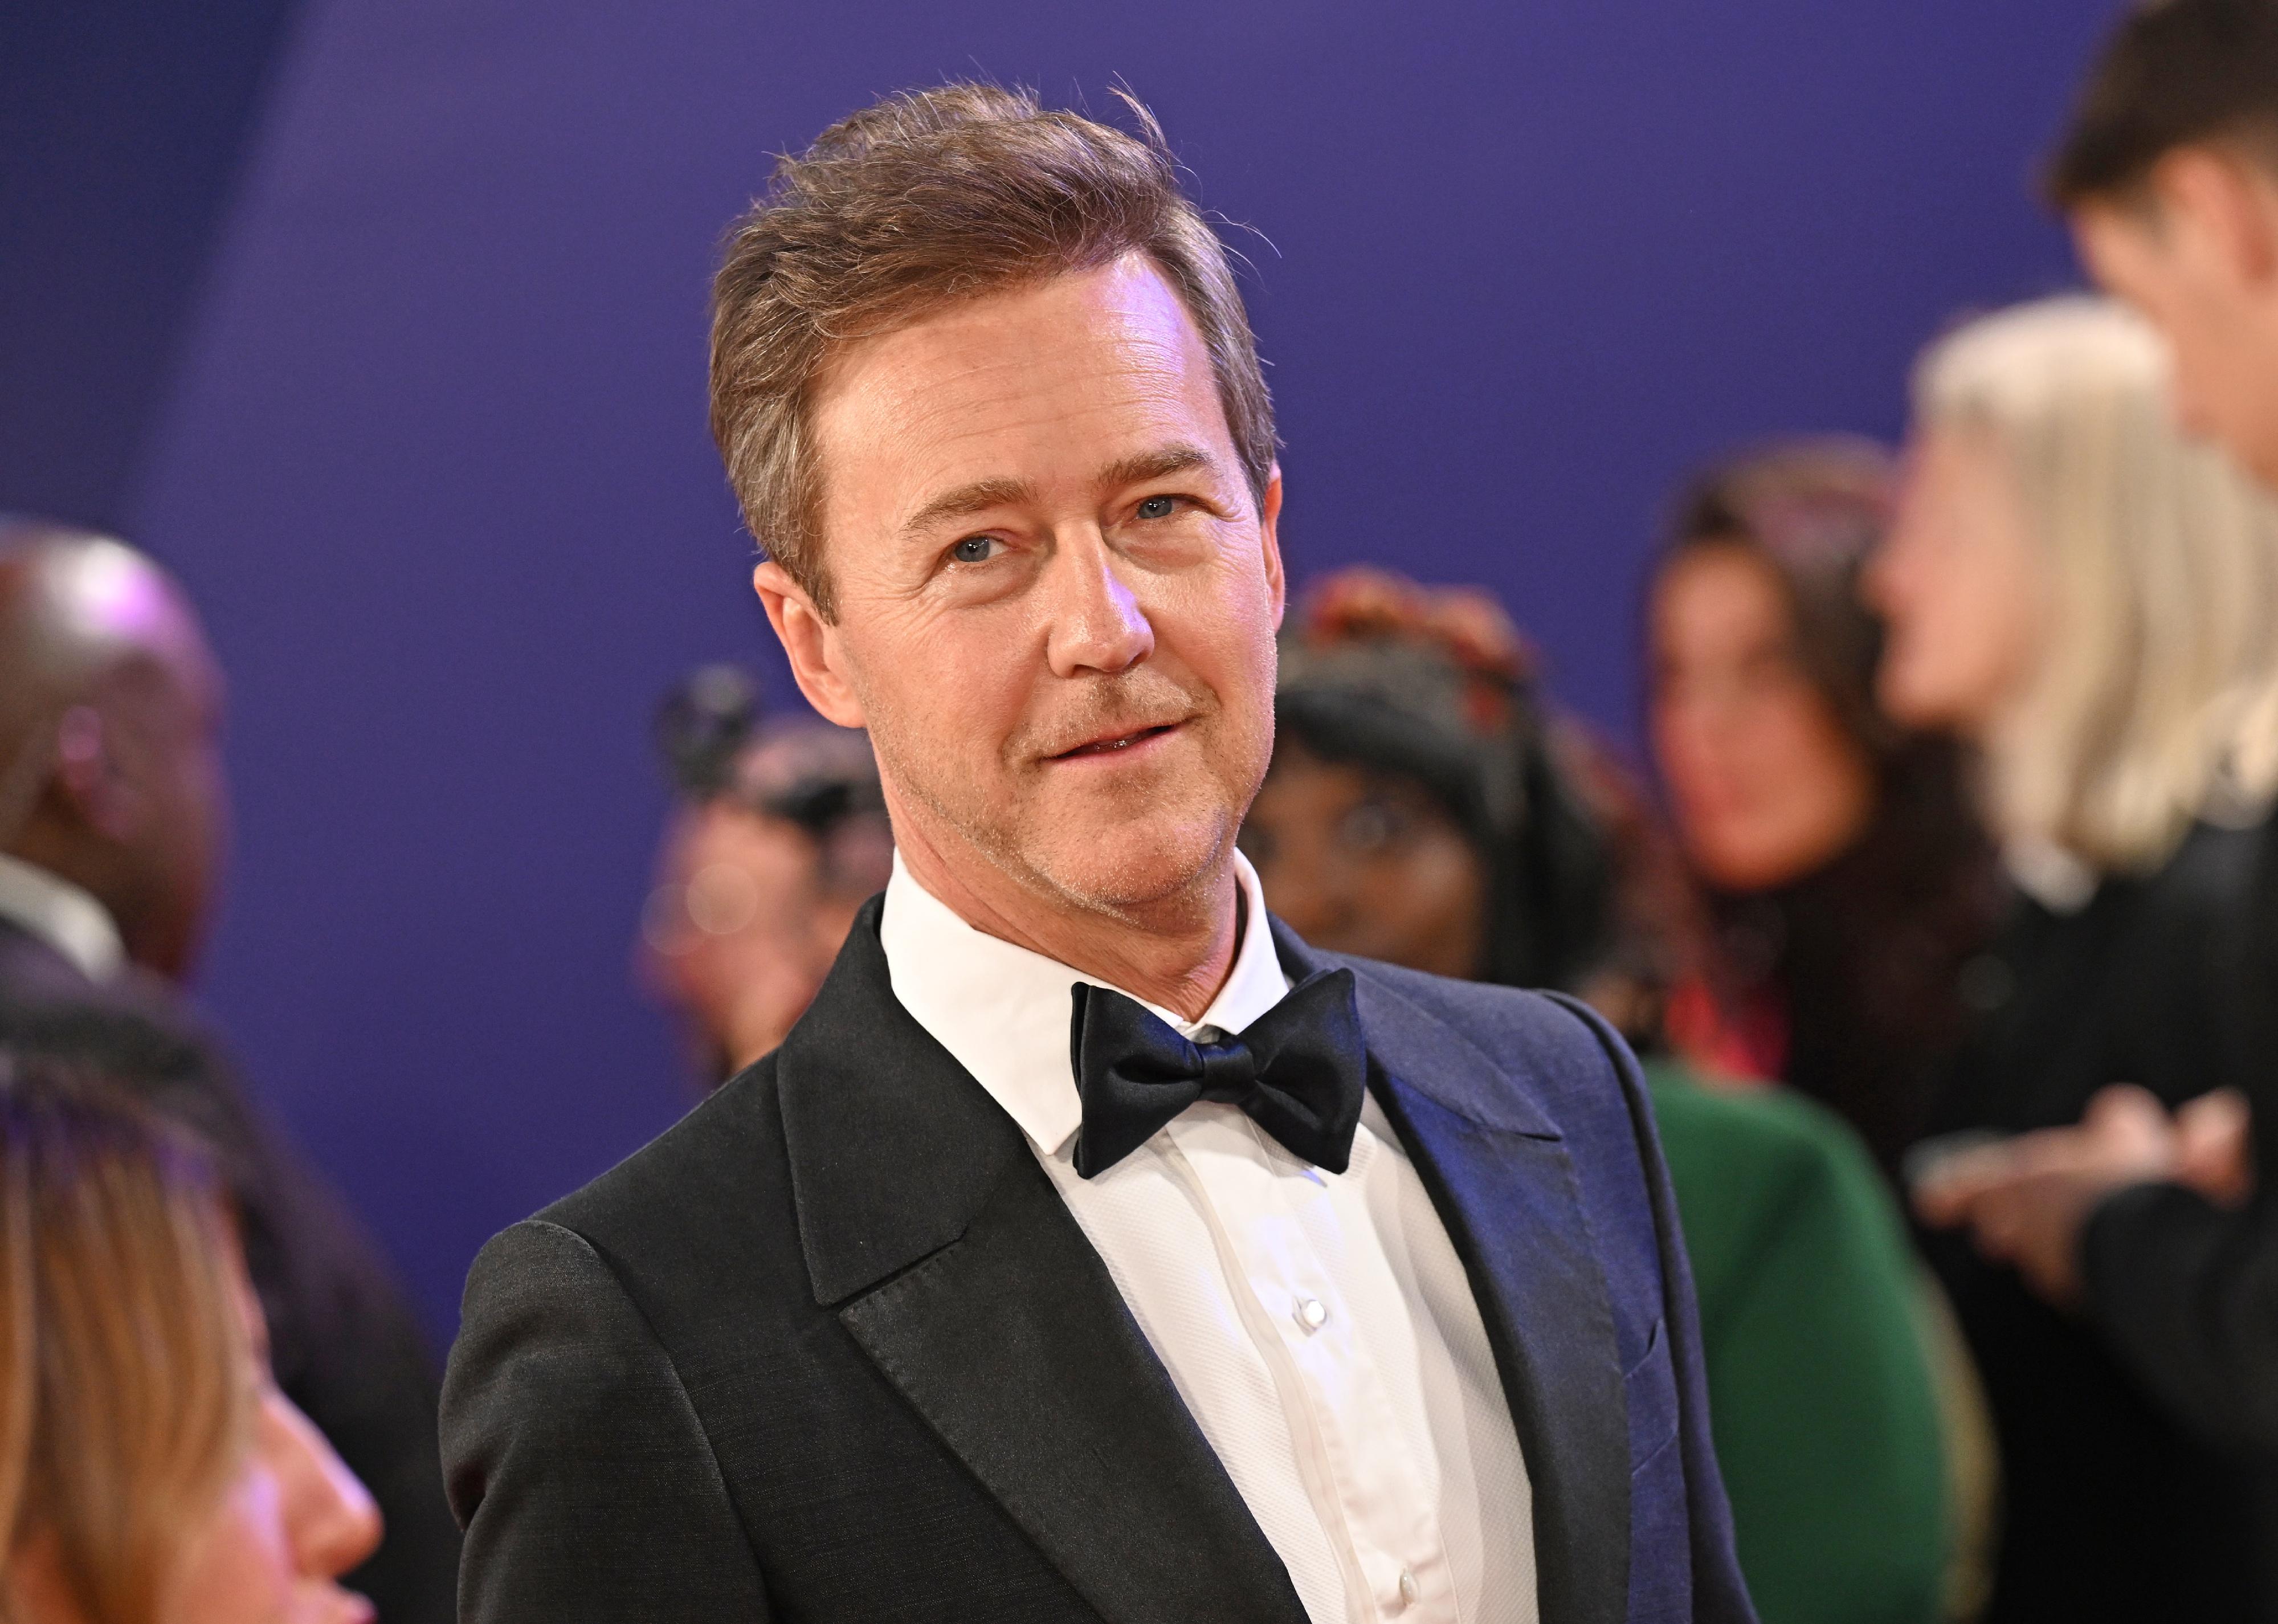 Edward Norton attends the "Glass Onion: A Knives Out Mystery" European Premiere.